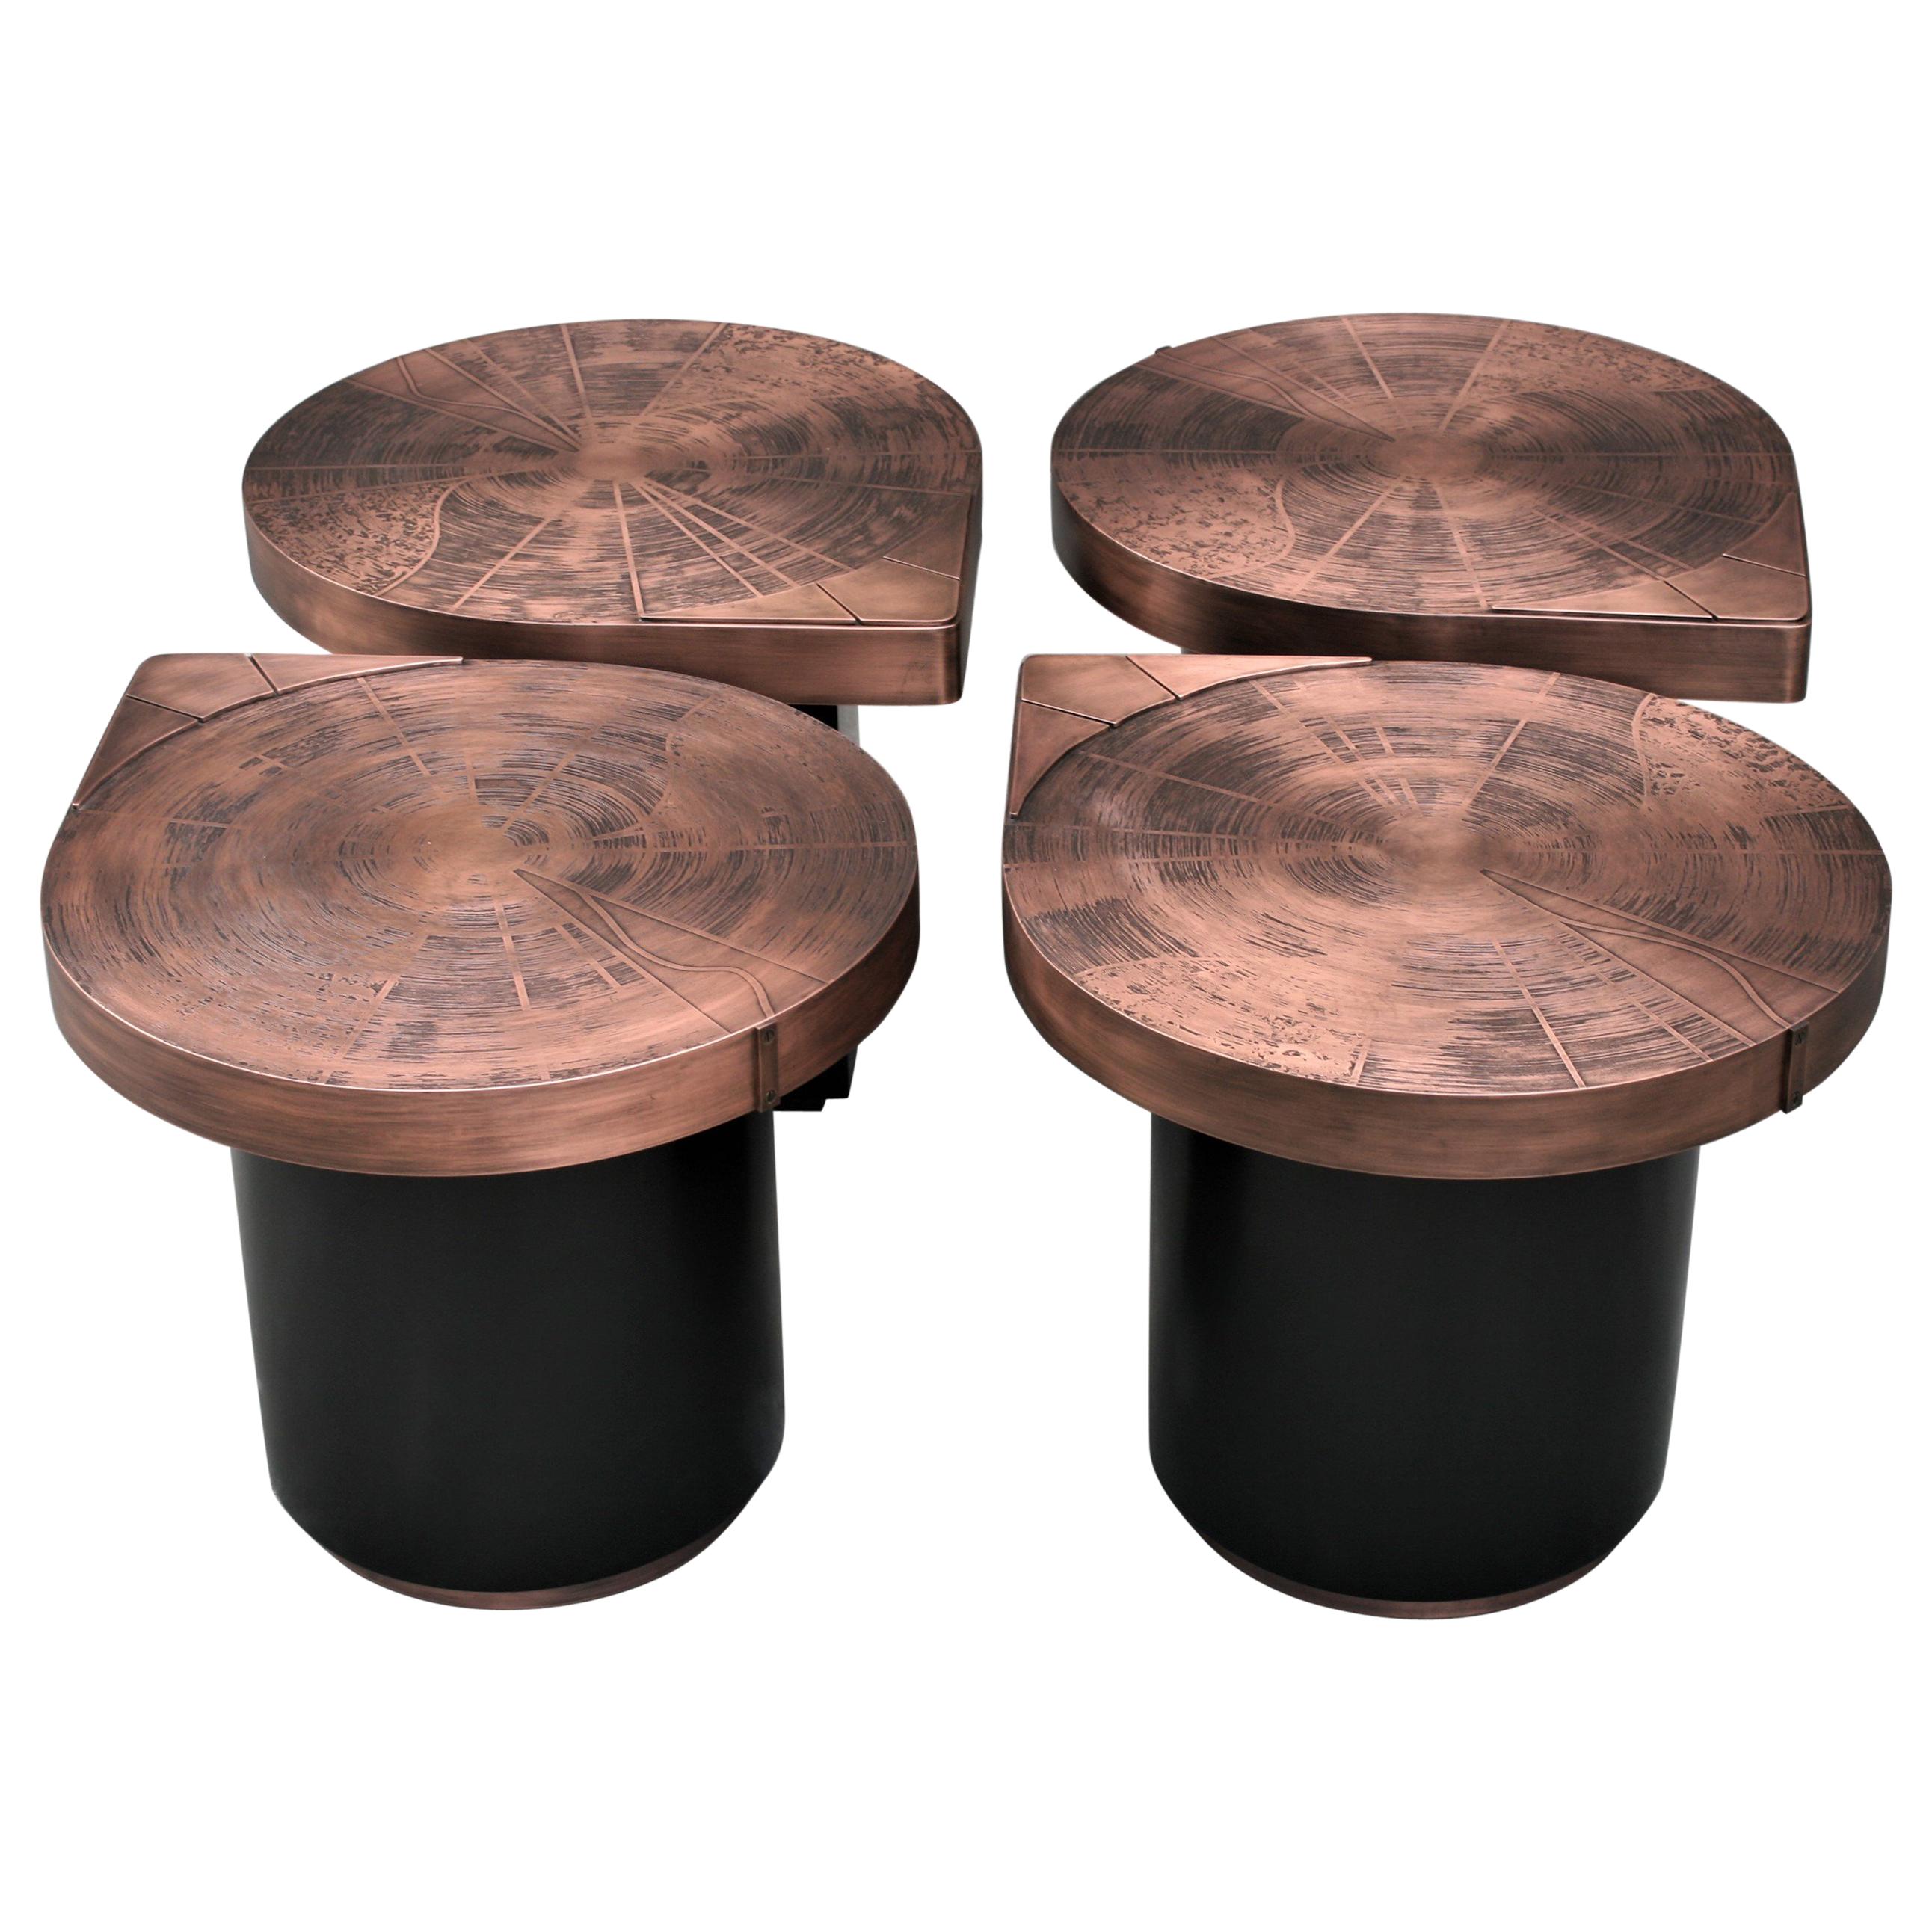 Four Matching Coffee Tables, Teardrops, Patinated Acid Etched Copper For Sale